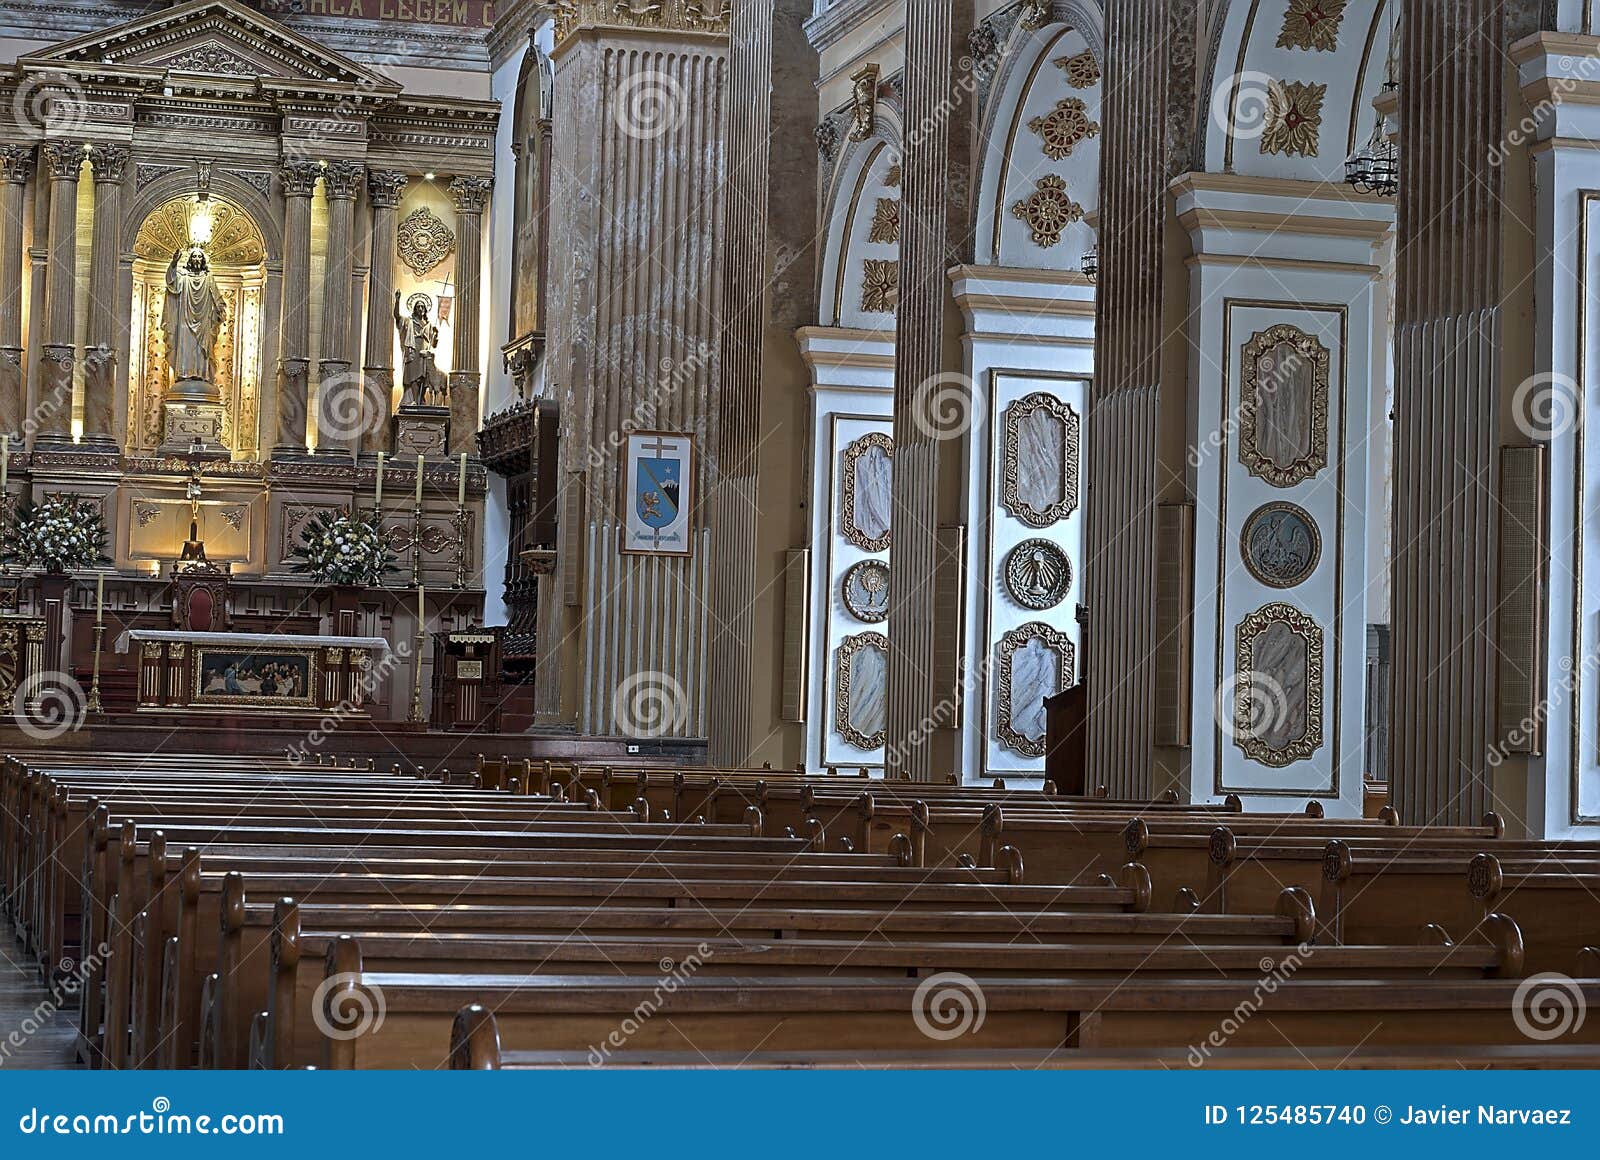 interior of the temple of the sacred heart or cathedral of pasto colombia